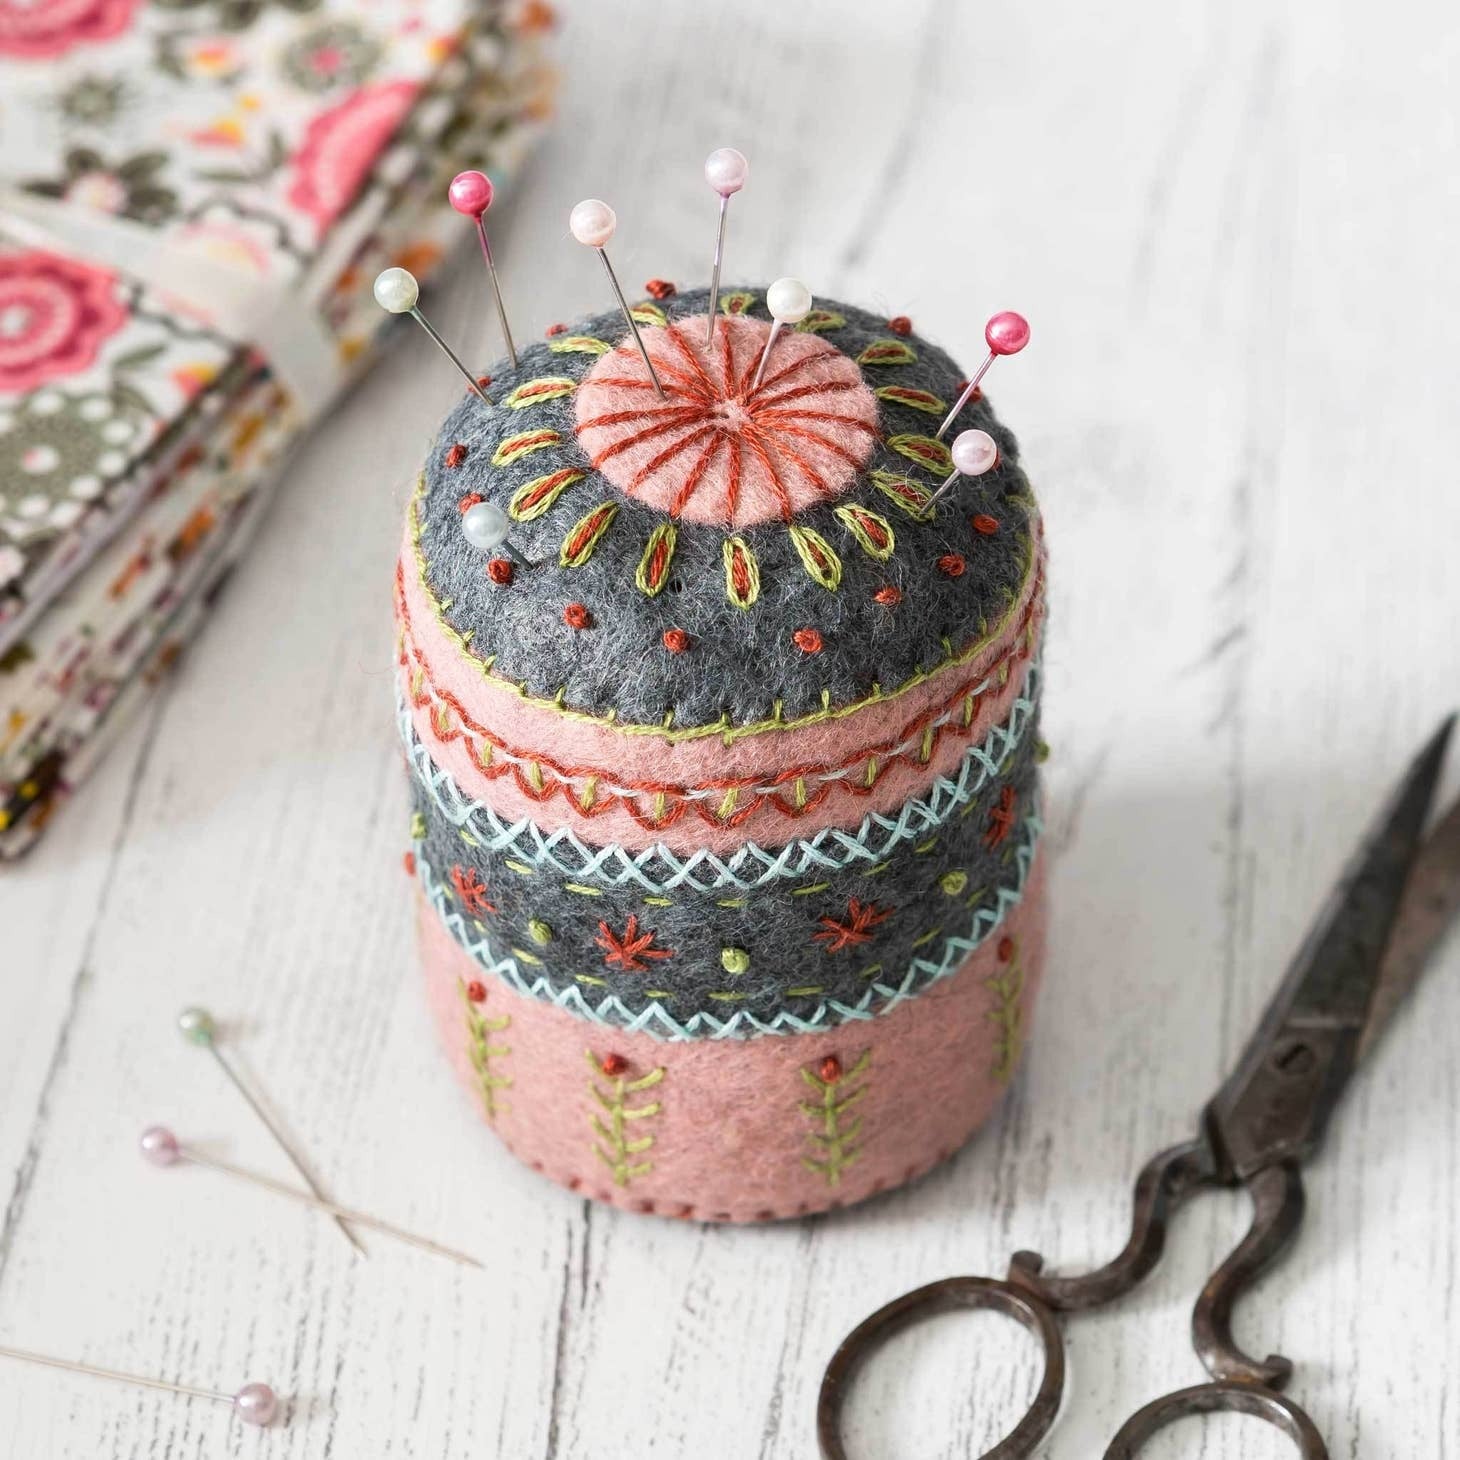 Handcrafted folk-style felt pincushion adorned with intricate embroidery patterns, set against a rustic white wood background, accompanied by vintage scissors and floral fabric.